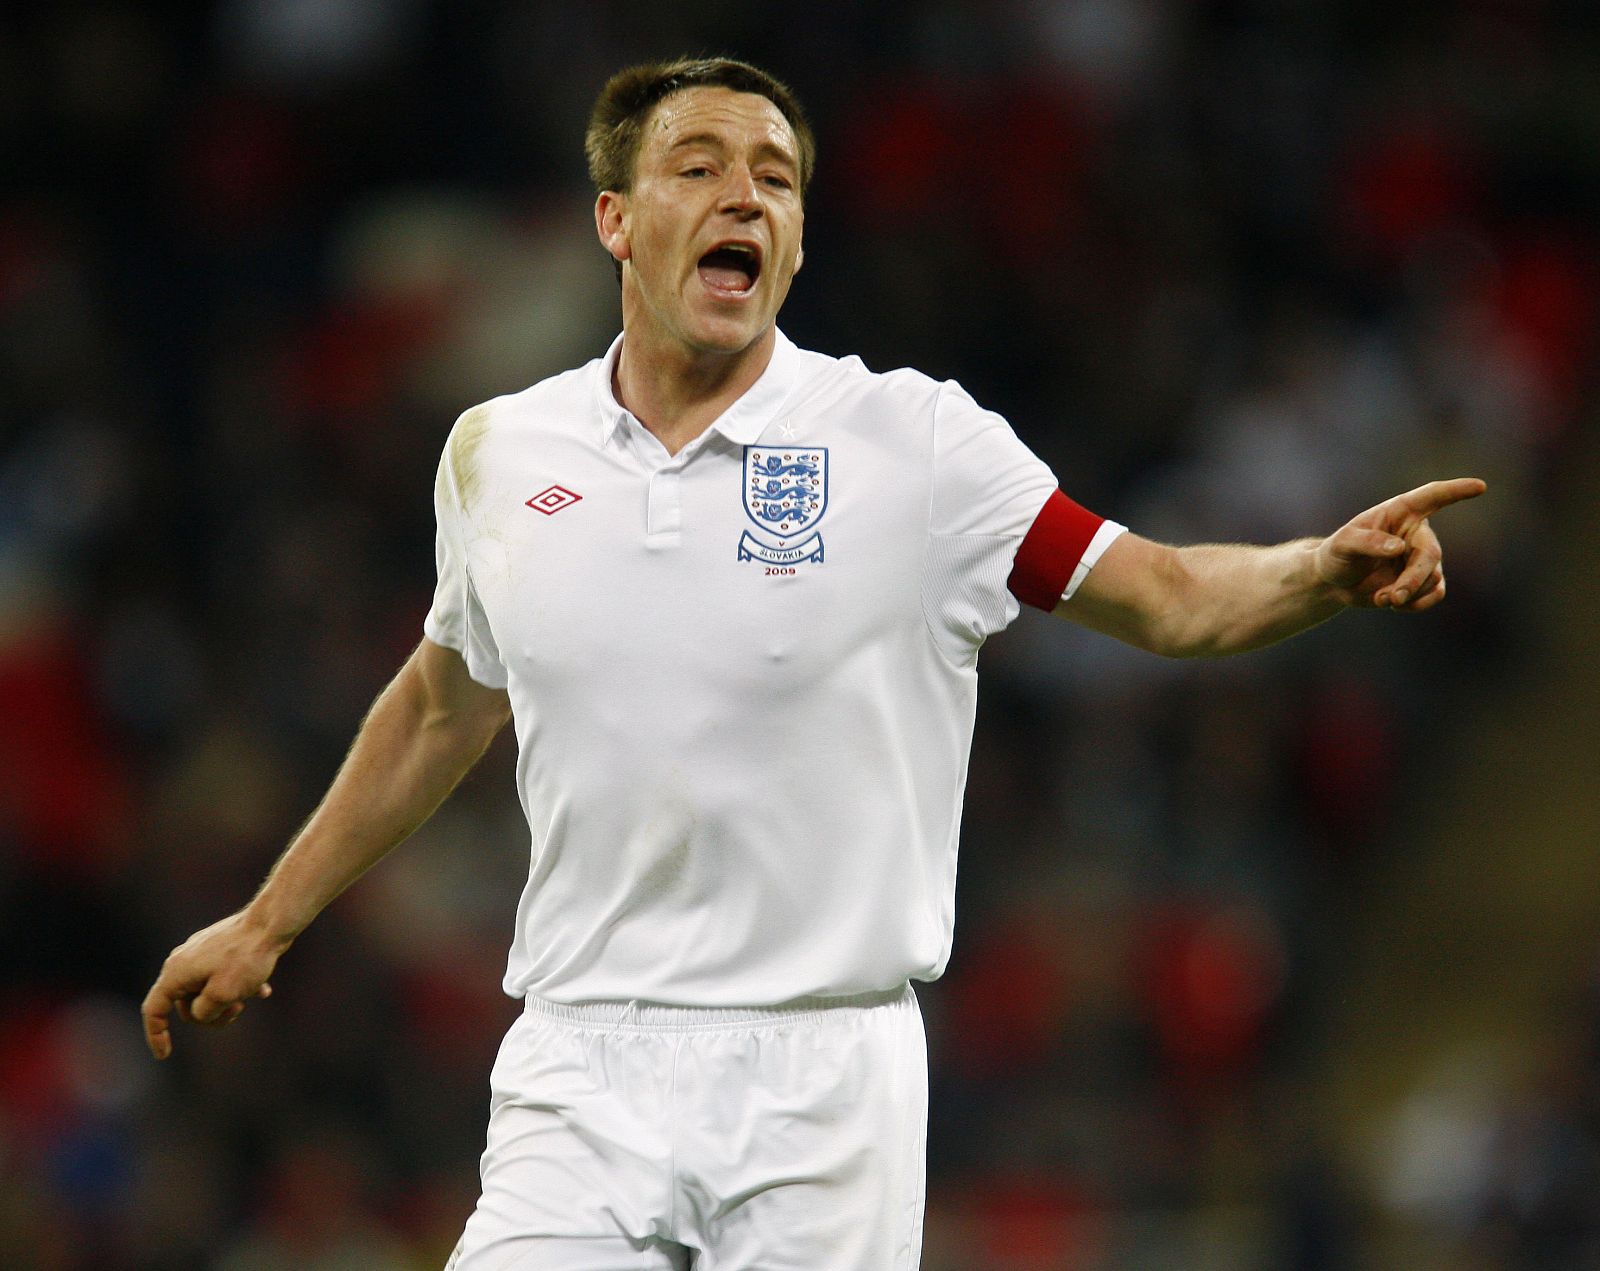 England's captain John Terry reacts during their international friendly soccer match against Slovakia in London